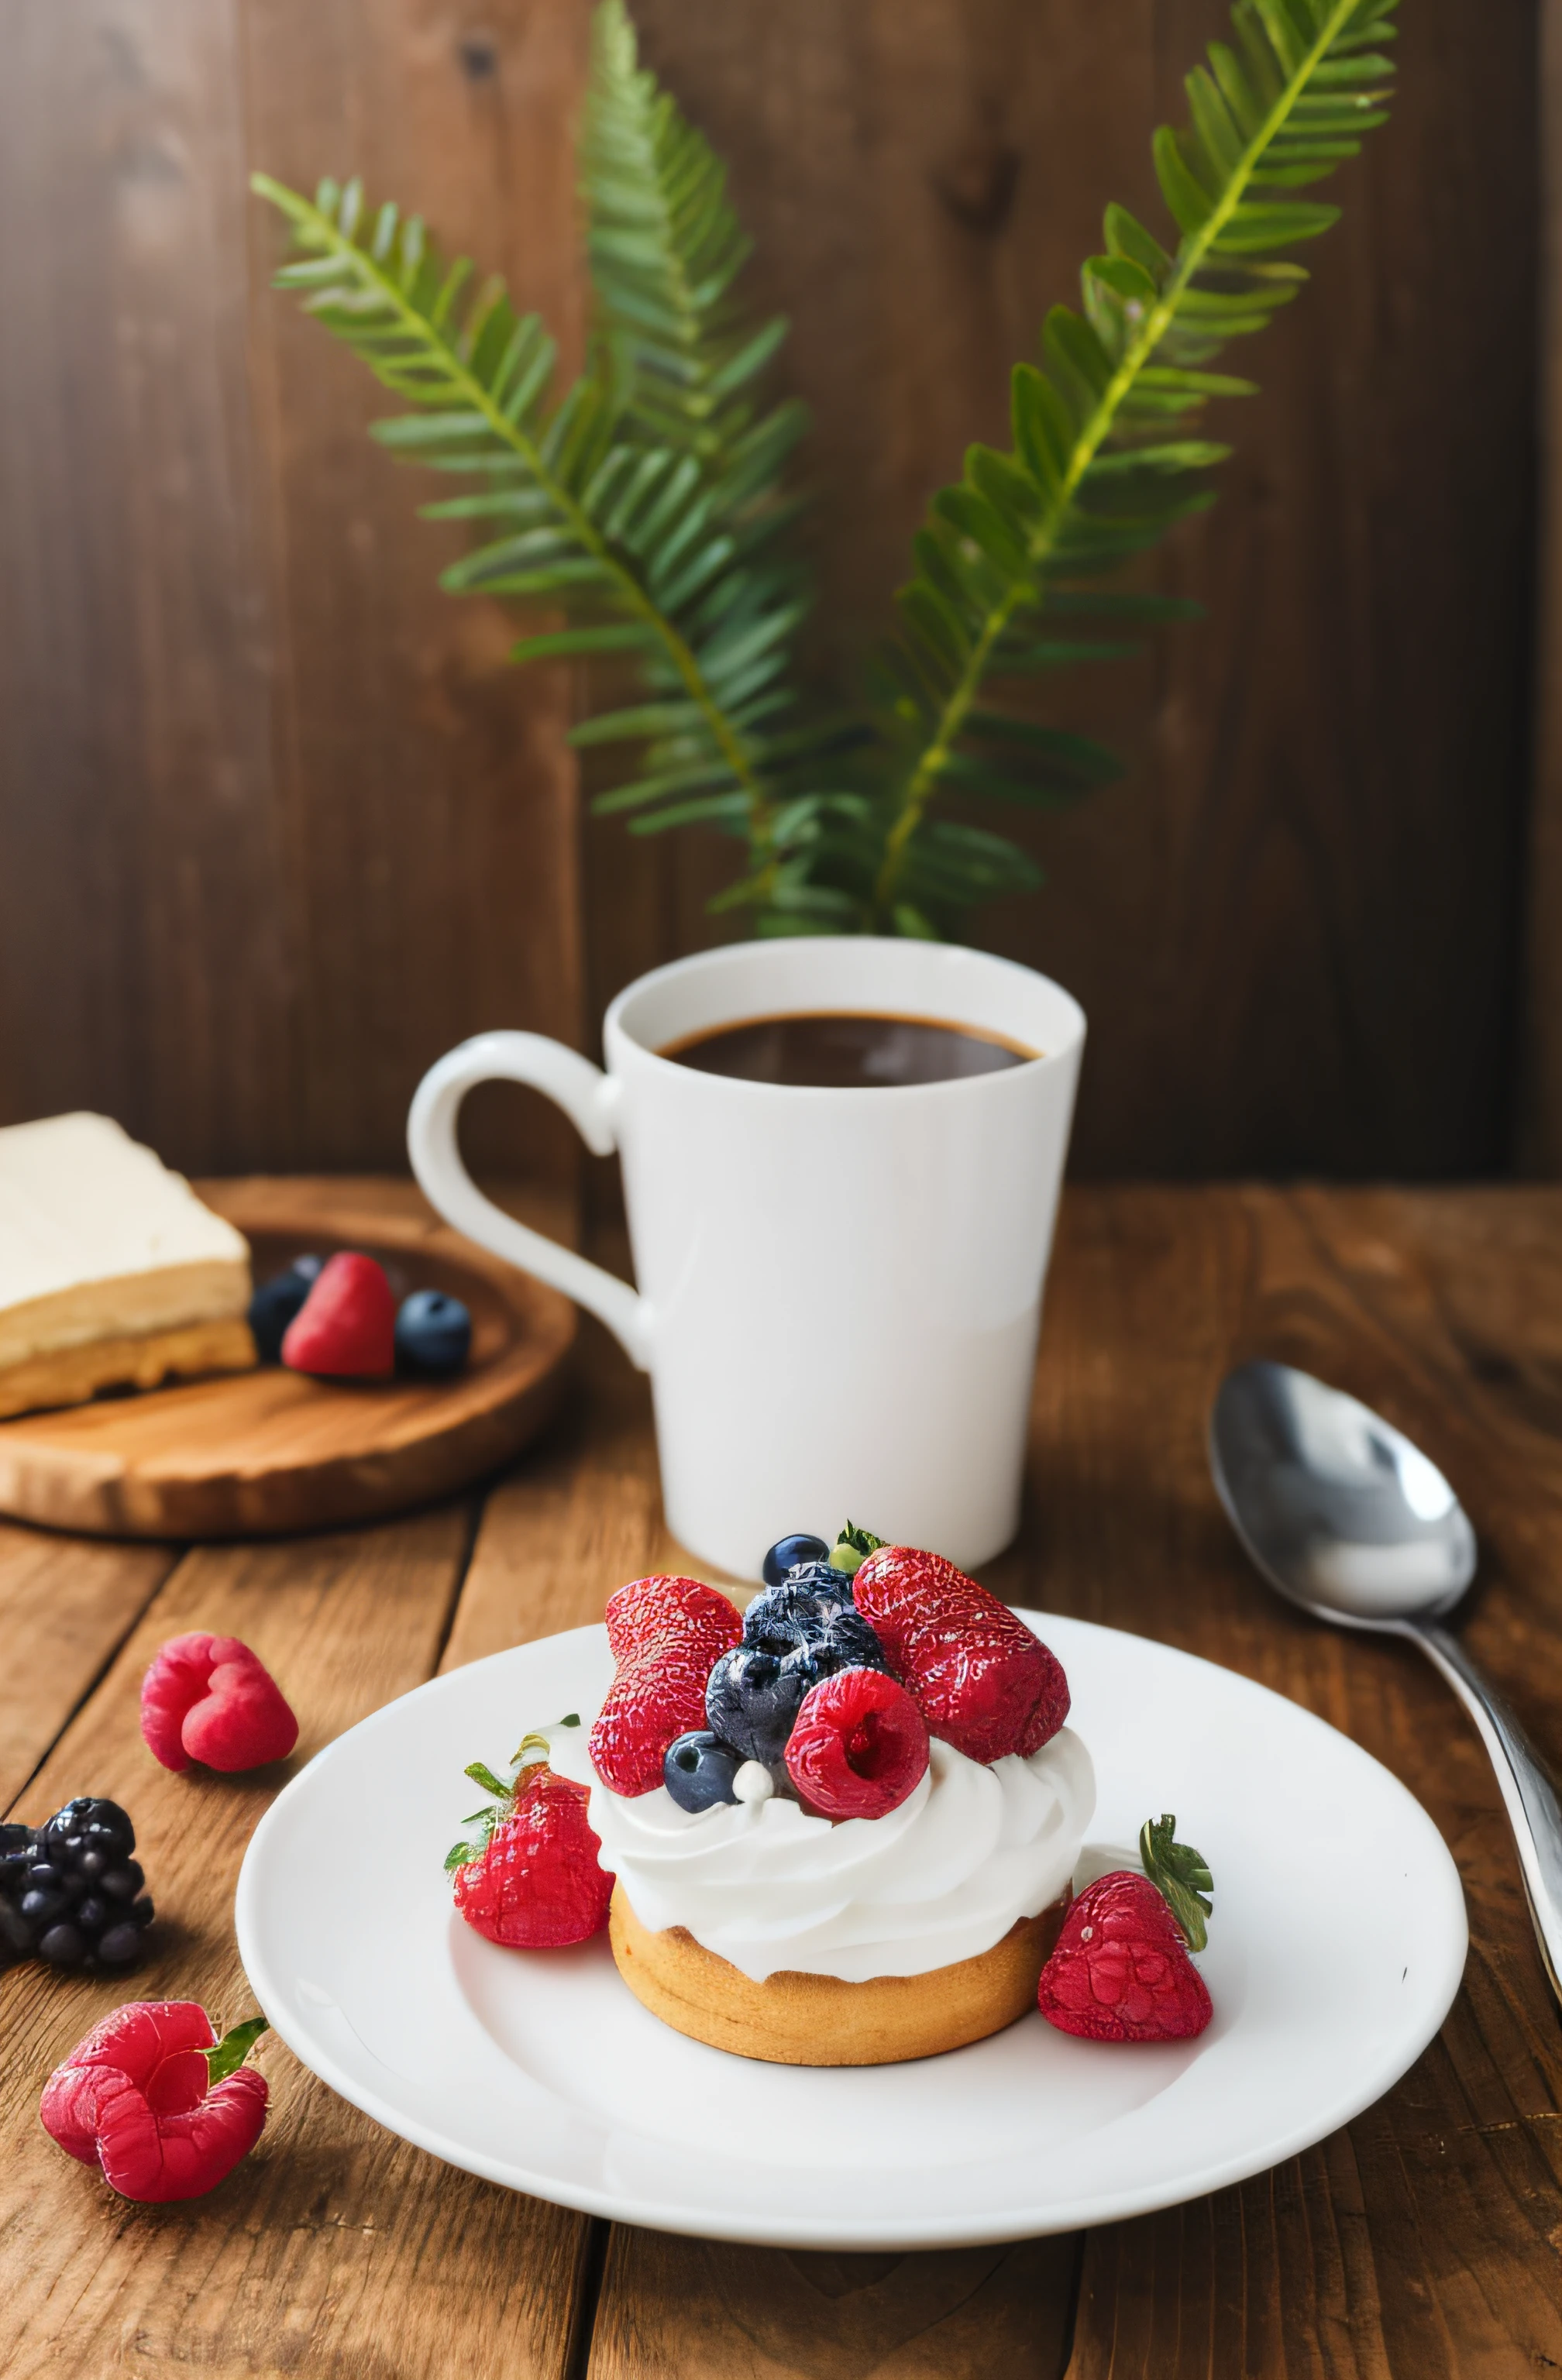 (masterpiece,best quality,highres,ultra_detailed:1.2),
white background, still life, flowers,rule of thirds,
coffee,dessert,cream,berries,cloth